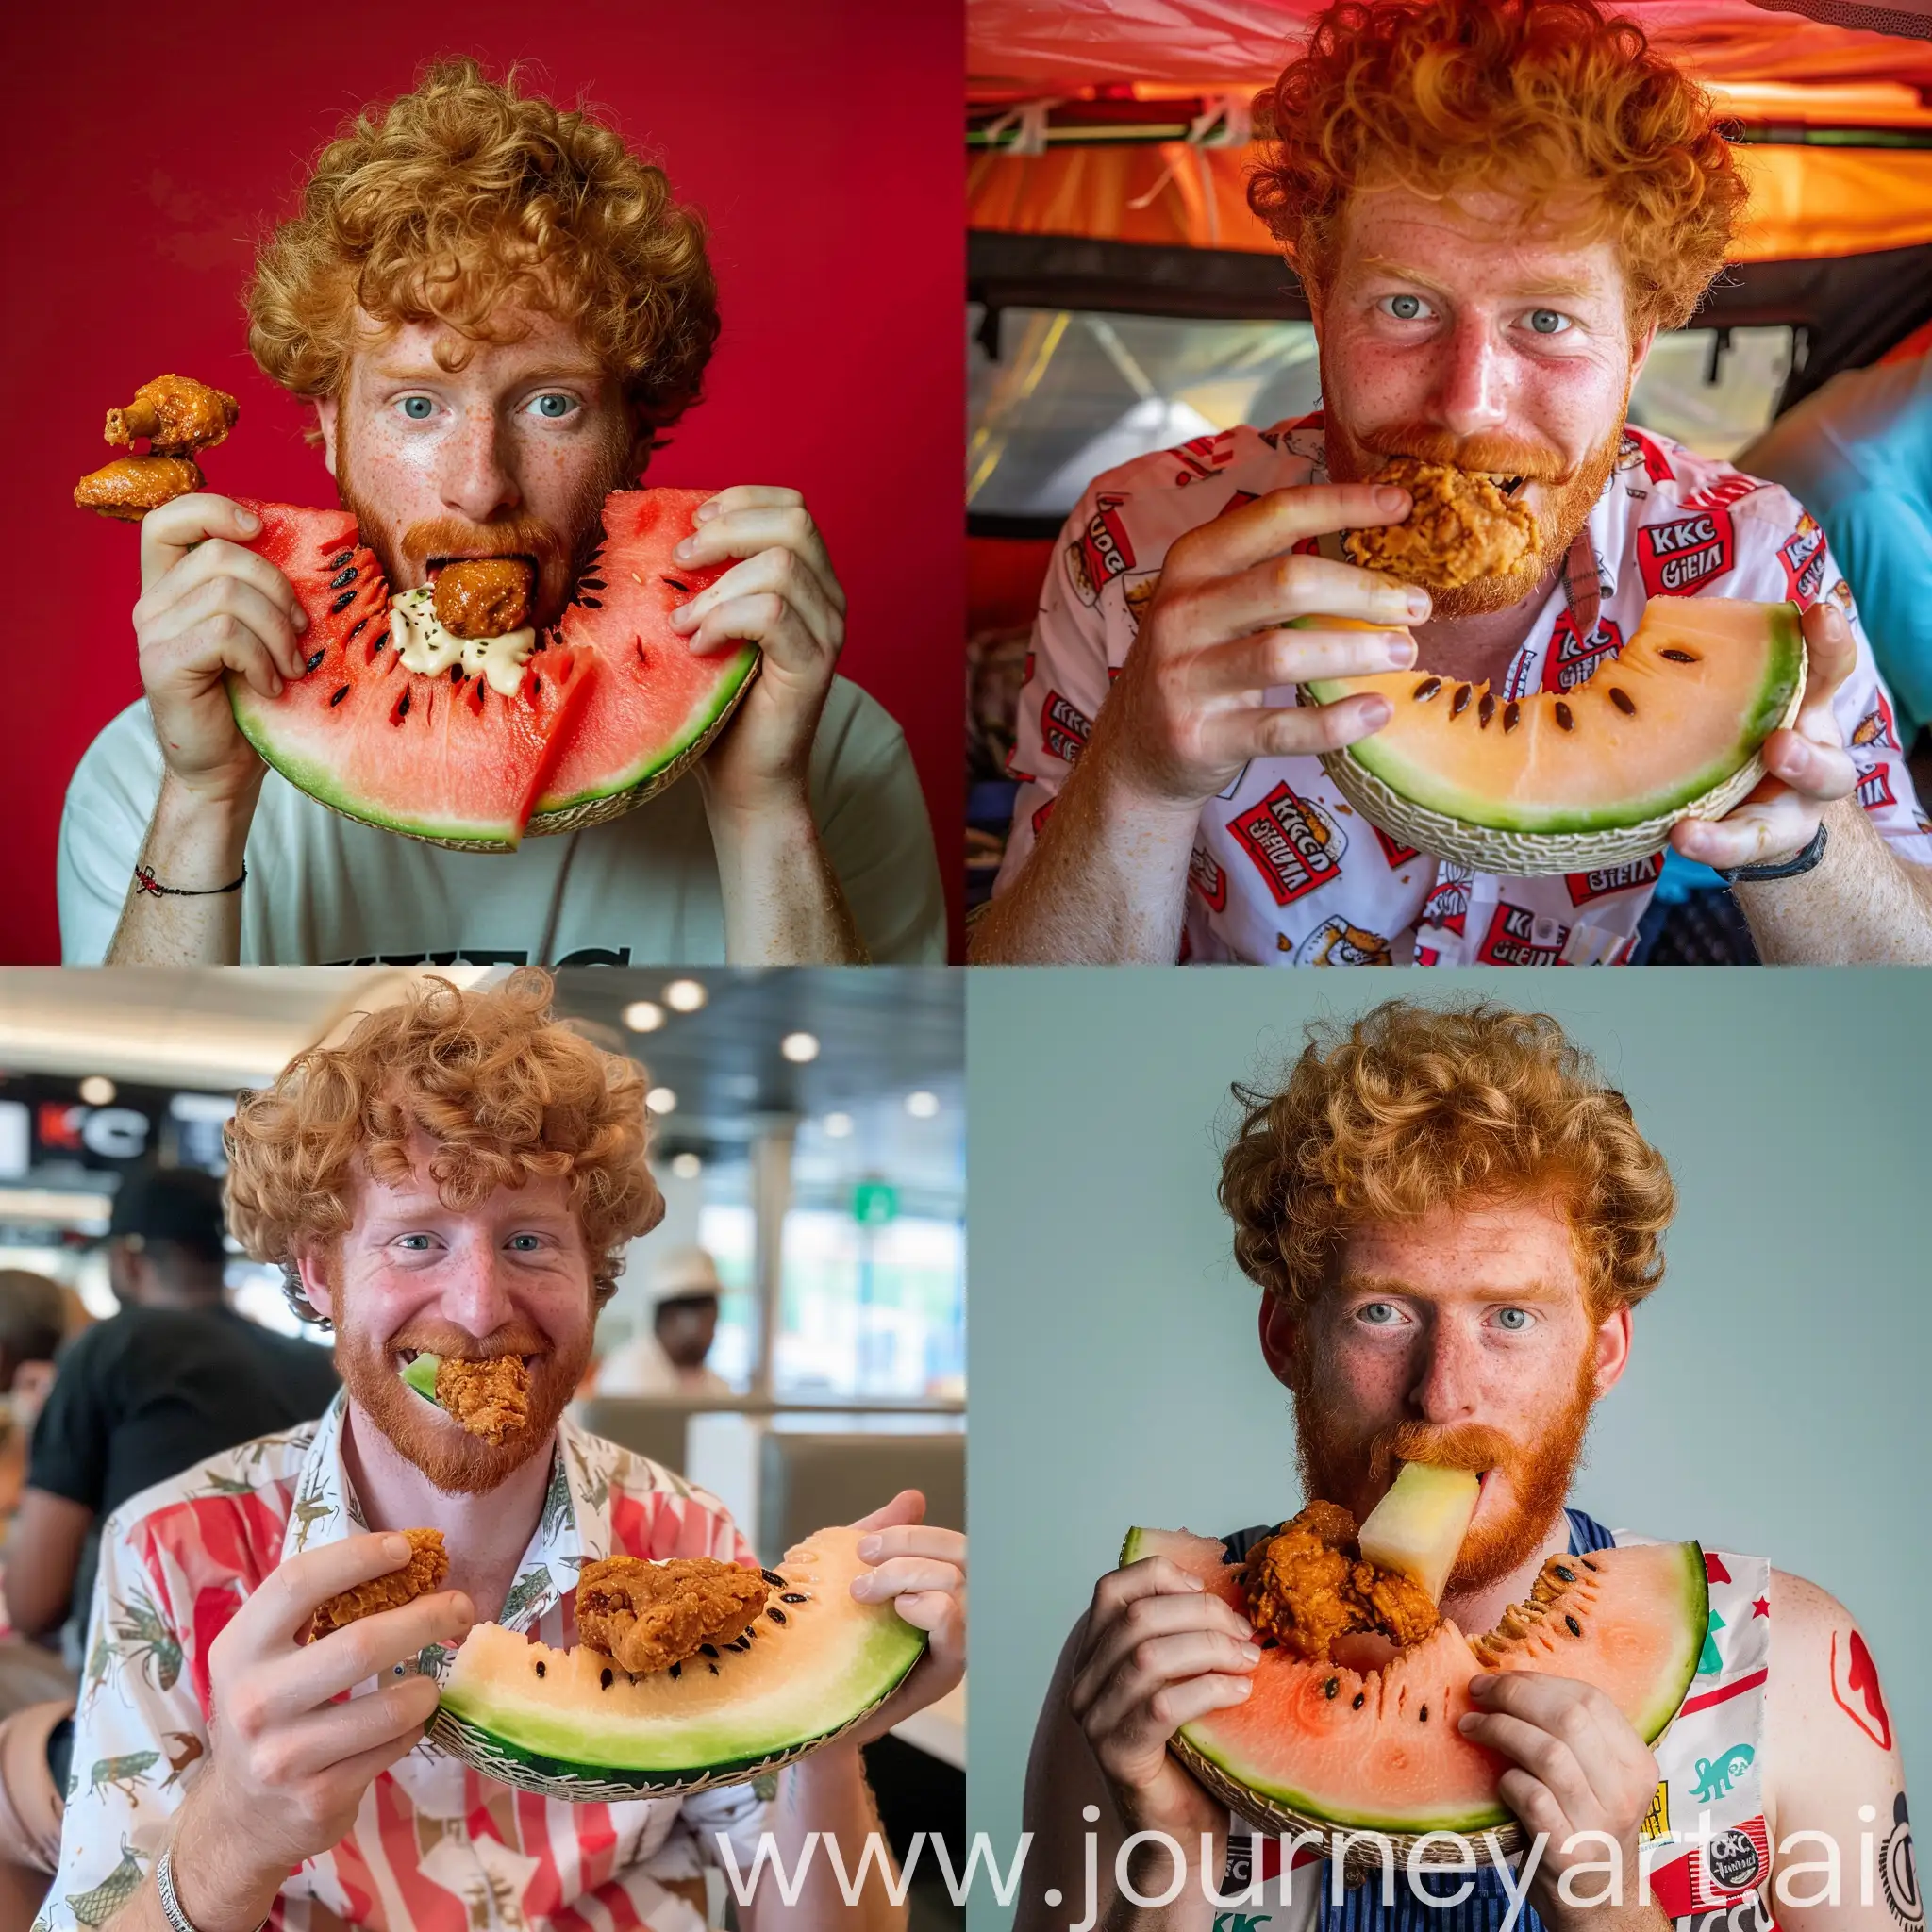 A ginger guy eating both KFC and melon